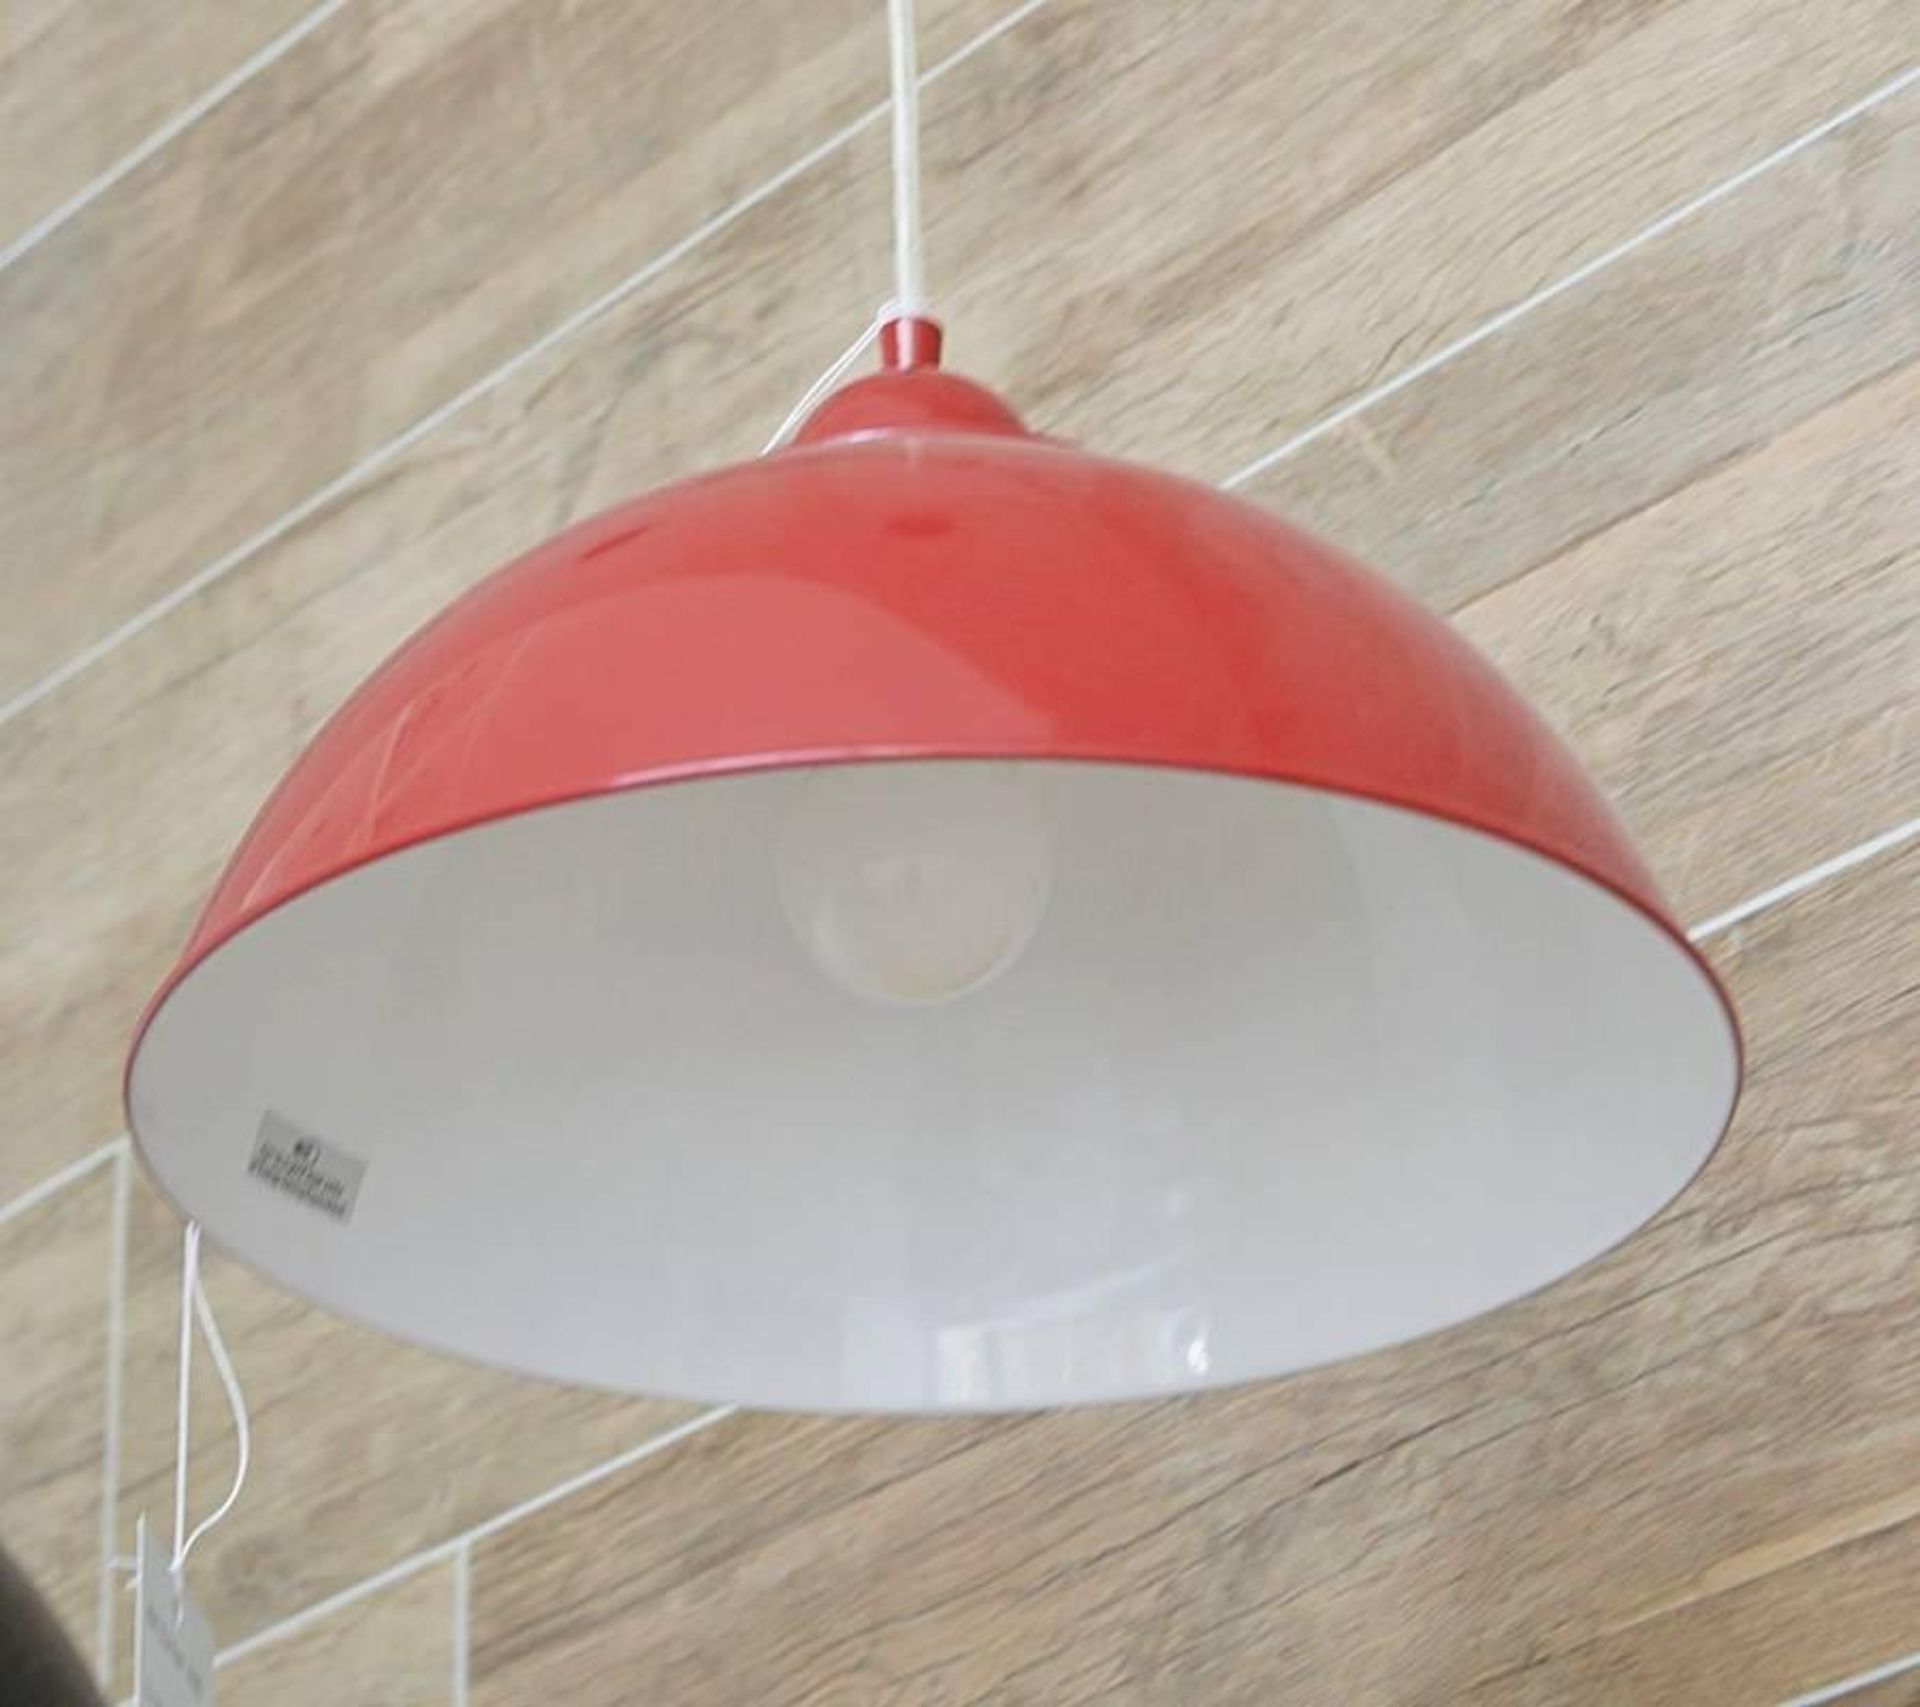 1 x SANFORD Red Half Dome Metal Pendant Light With White Inner - 34cm Diameter - New Boxed Stock - C - Image 3 of 4